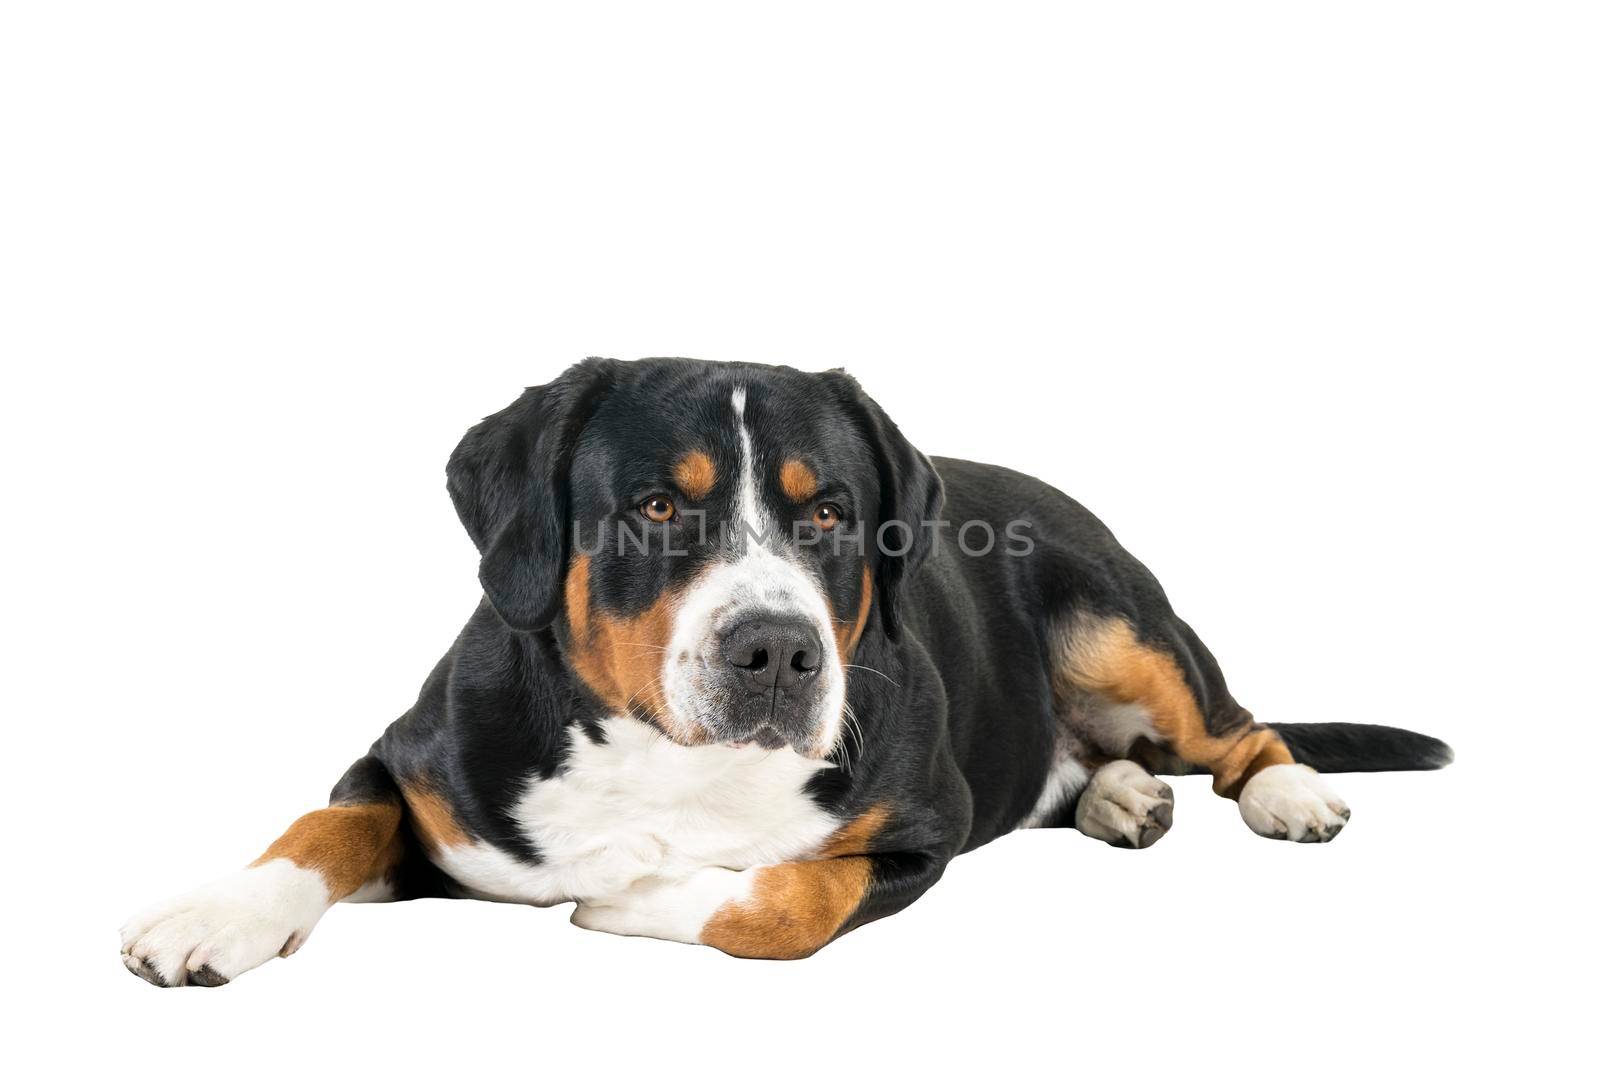 Greater Swiss Mountain Dog lying down sideways and looking next to the camera by LeoniekvanderVliet